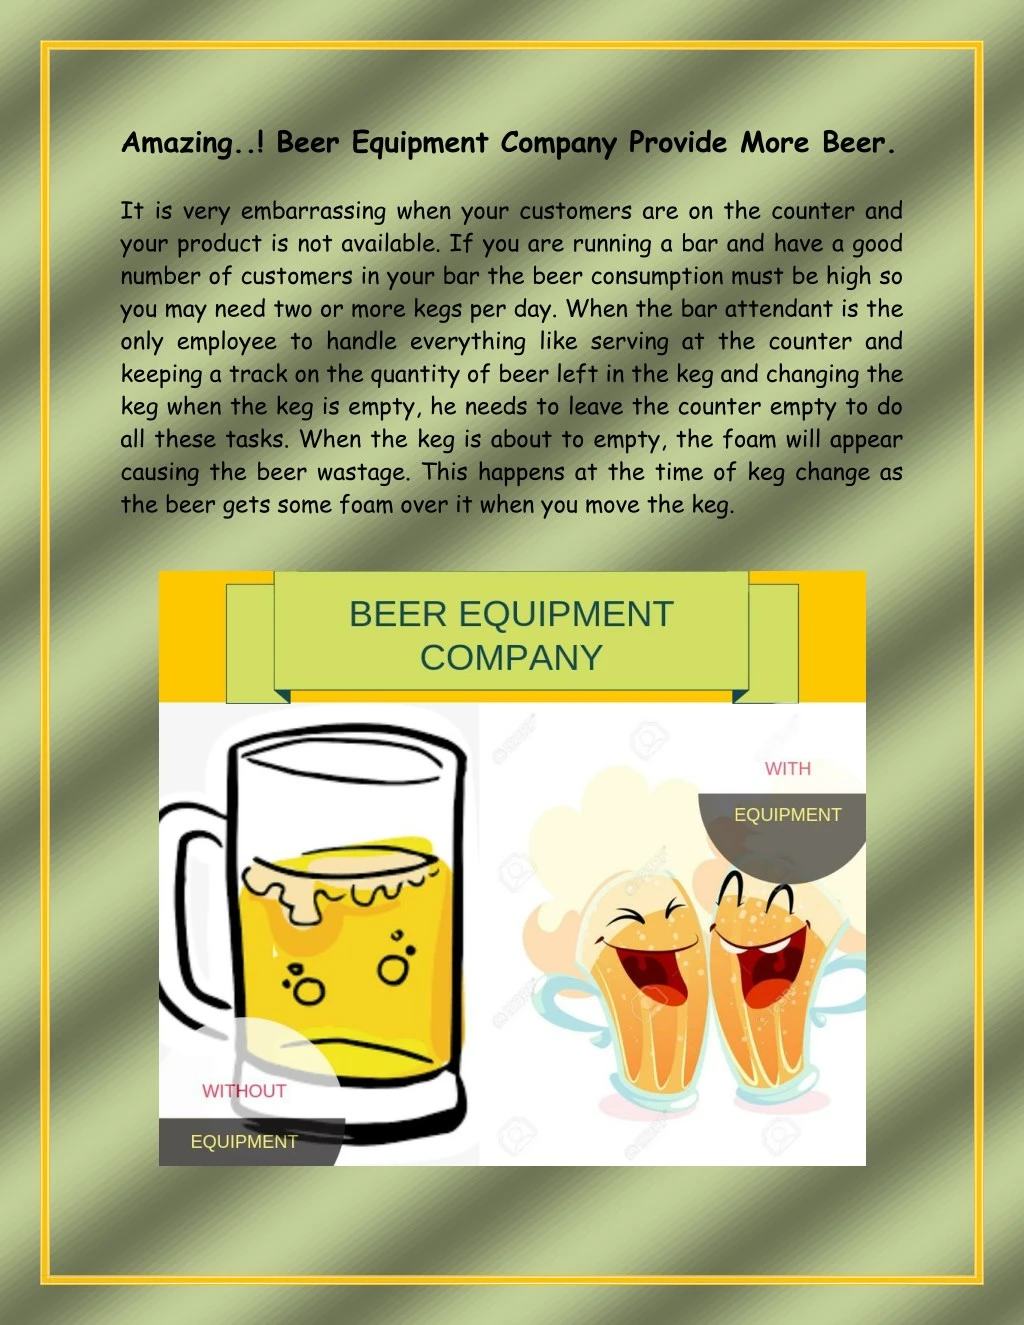 amazing beer equipment company provide more beer